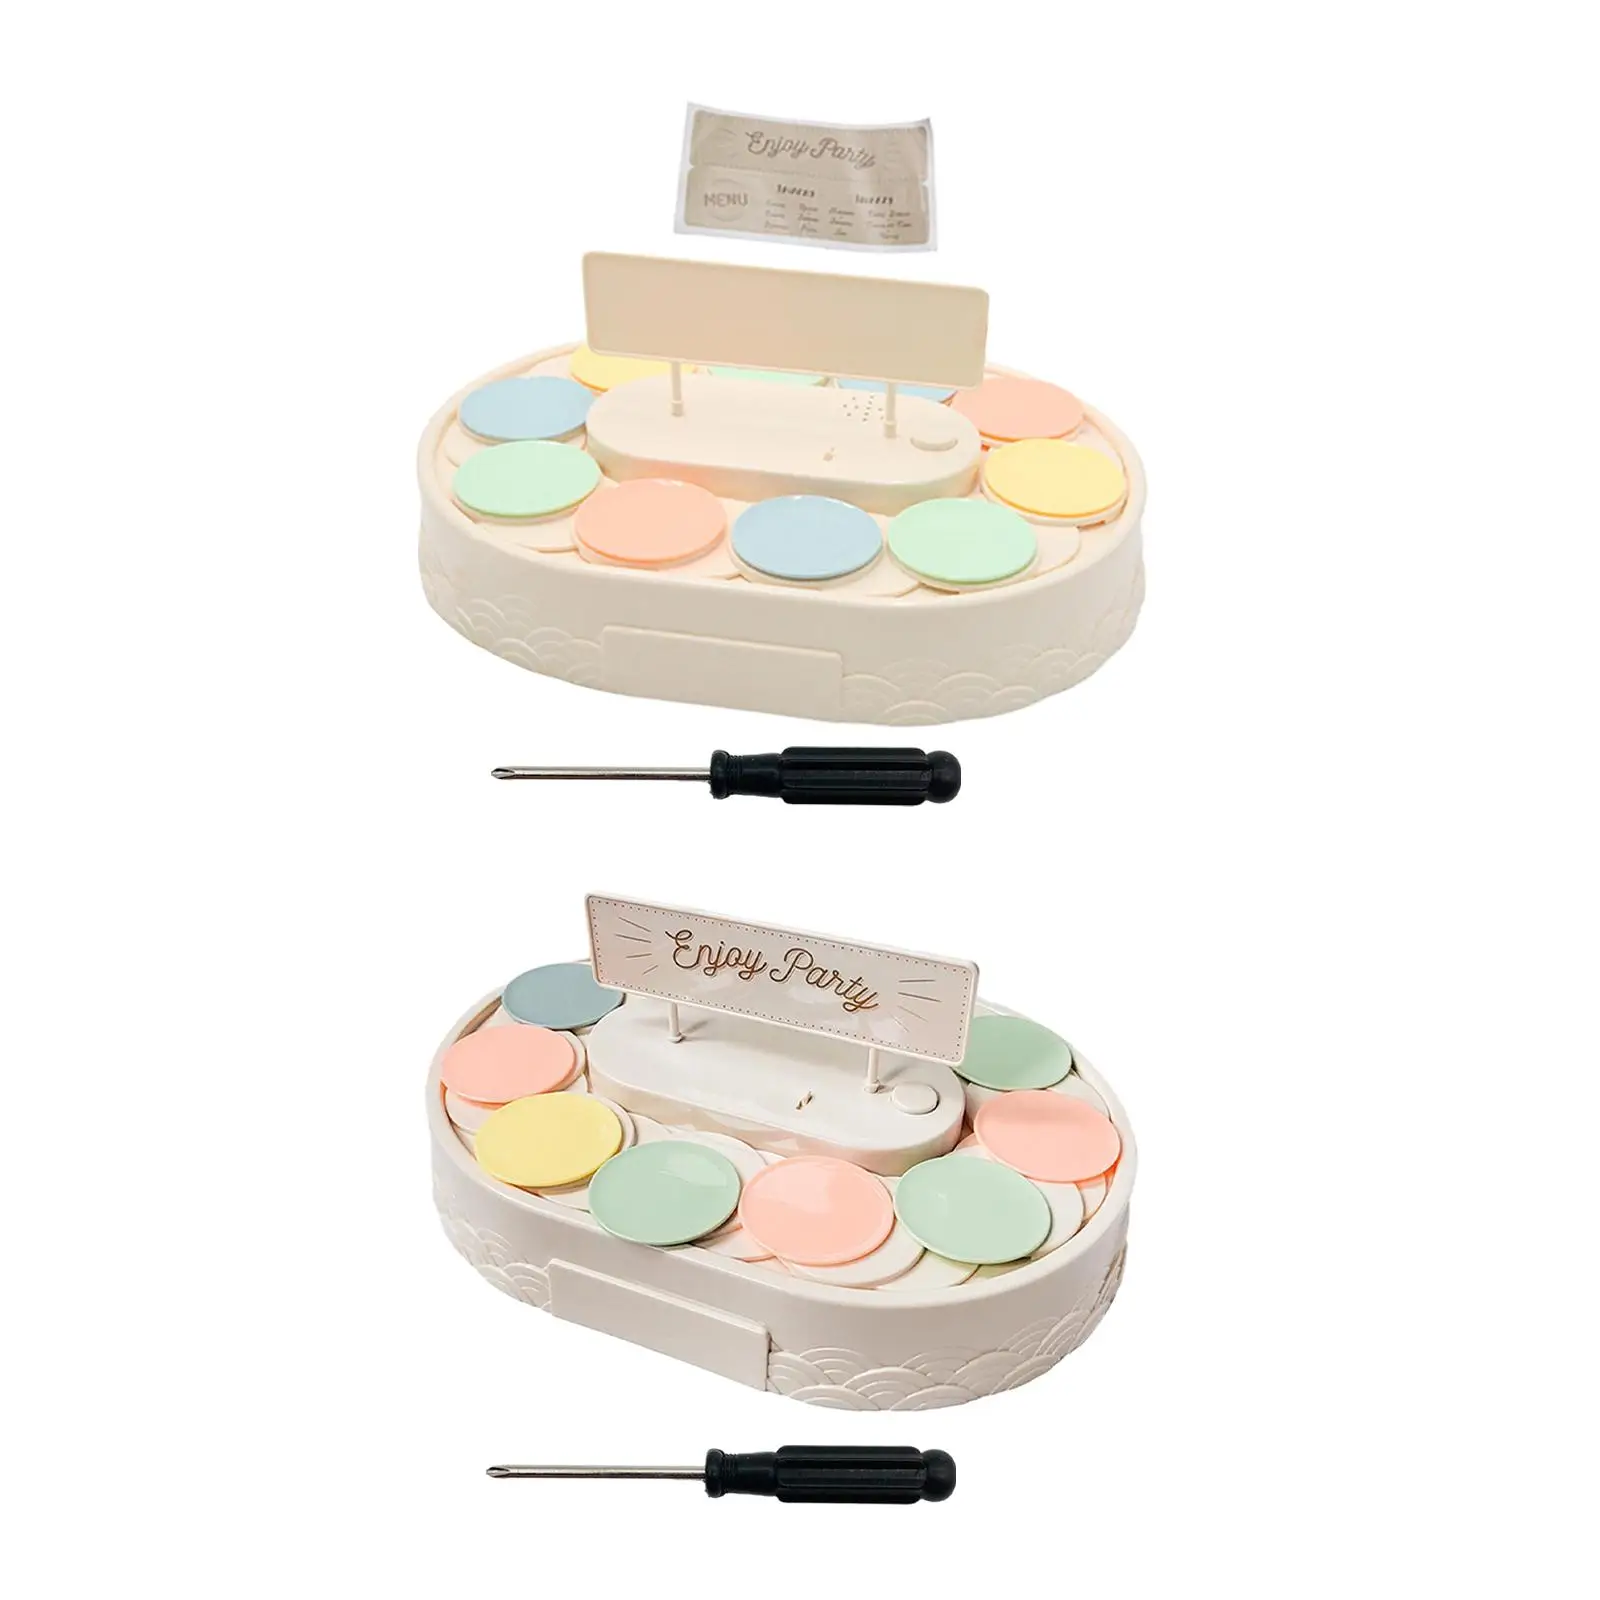 360 Degree Revolving Plates Swing Tray Carousel Cupcake Holder Cookie Cupcake Holder for Jewelry Wedding Event Desserts Banquet